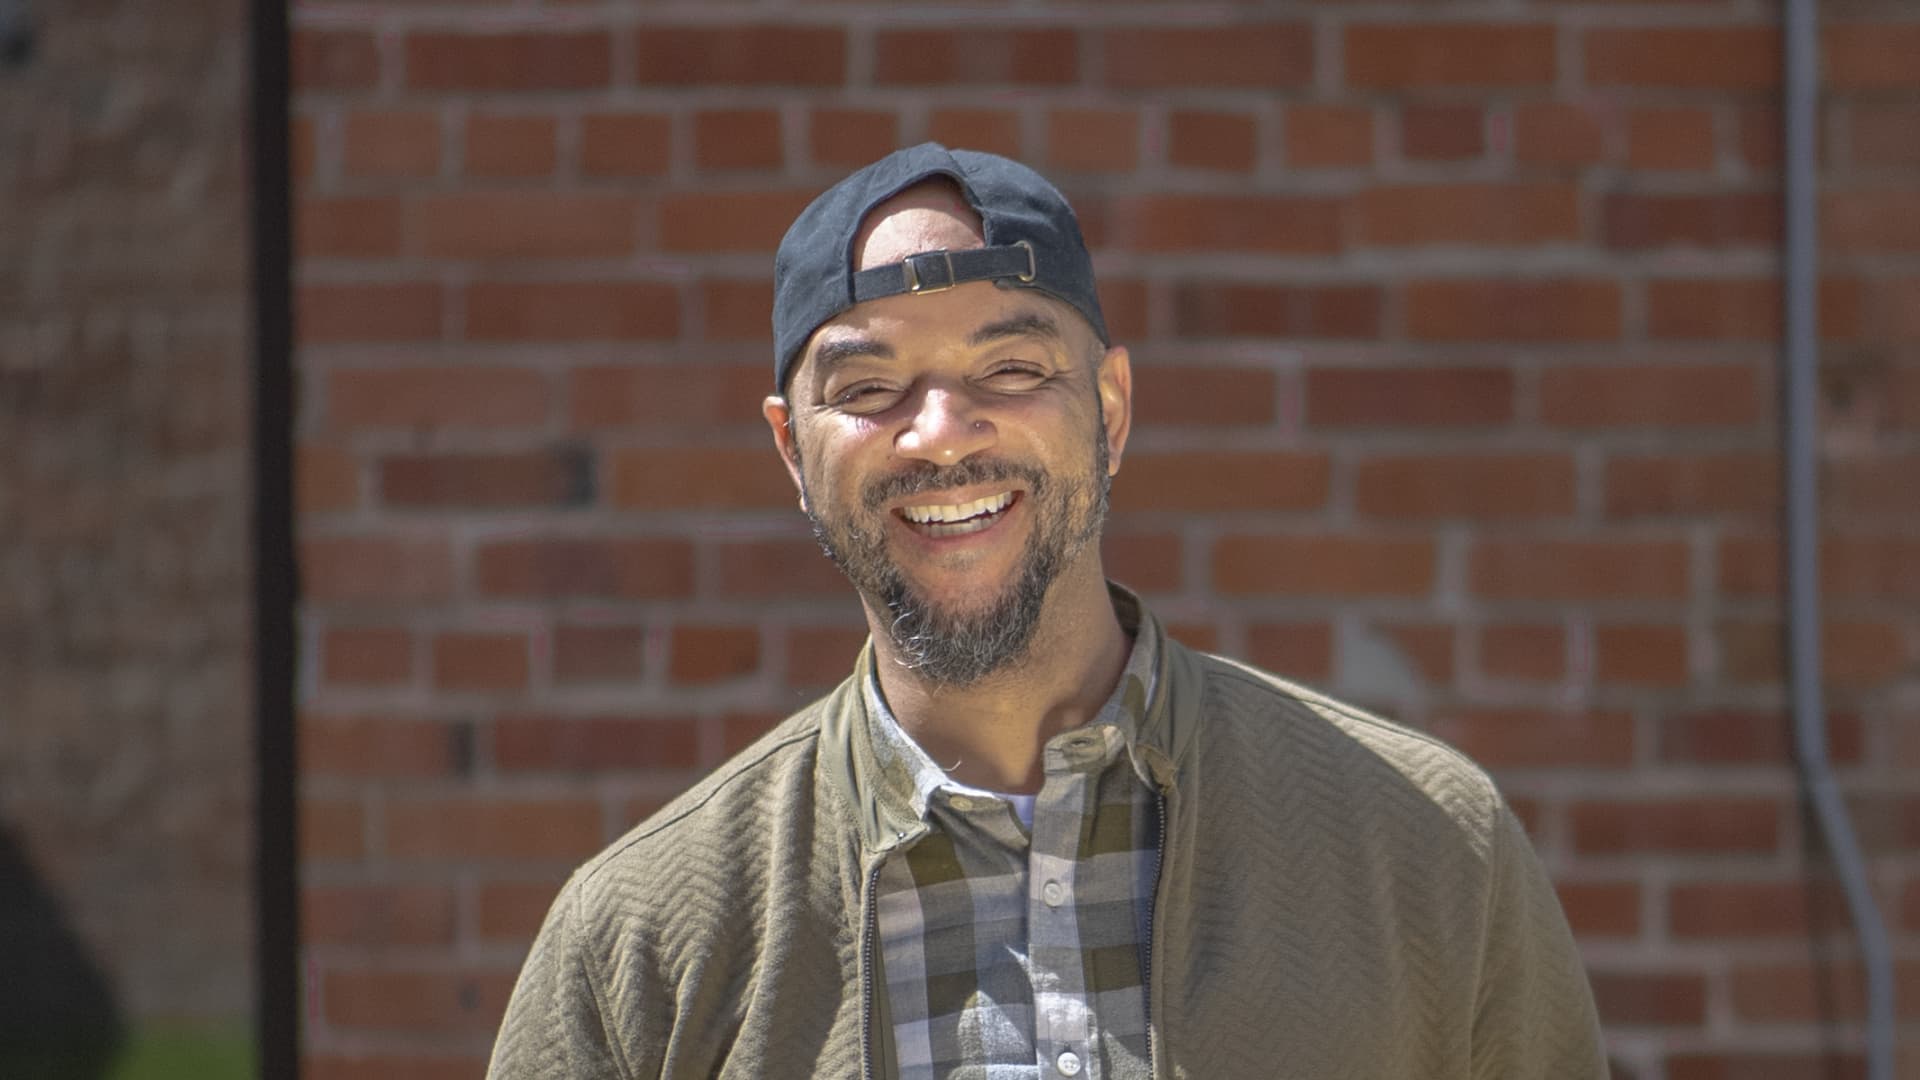 Meet a 35-year-old teaching tech skills to low-income youth through video games